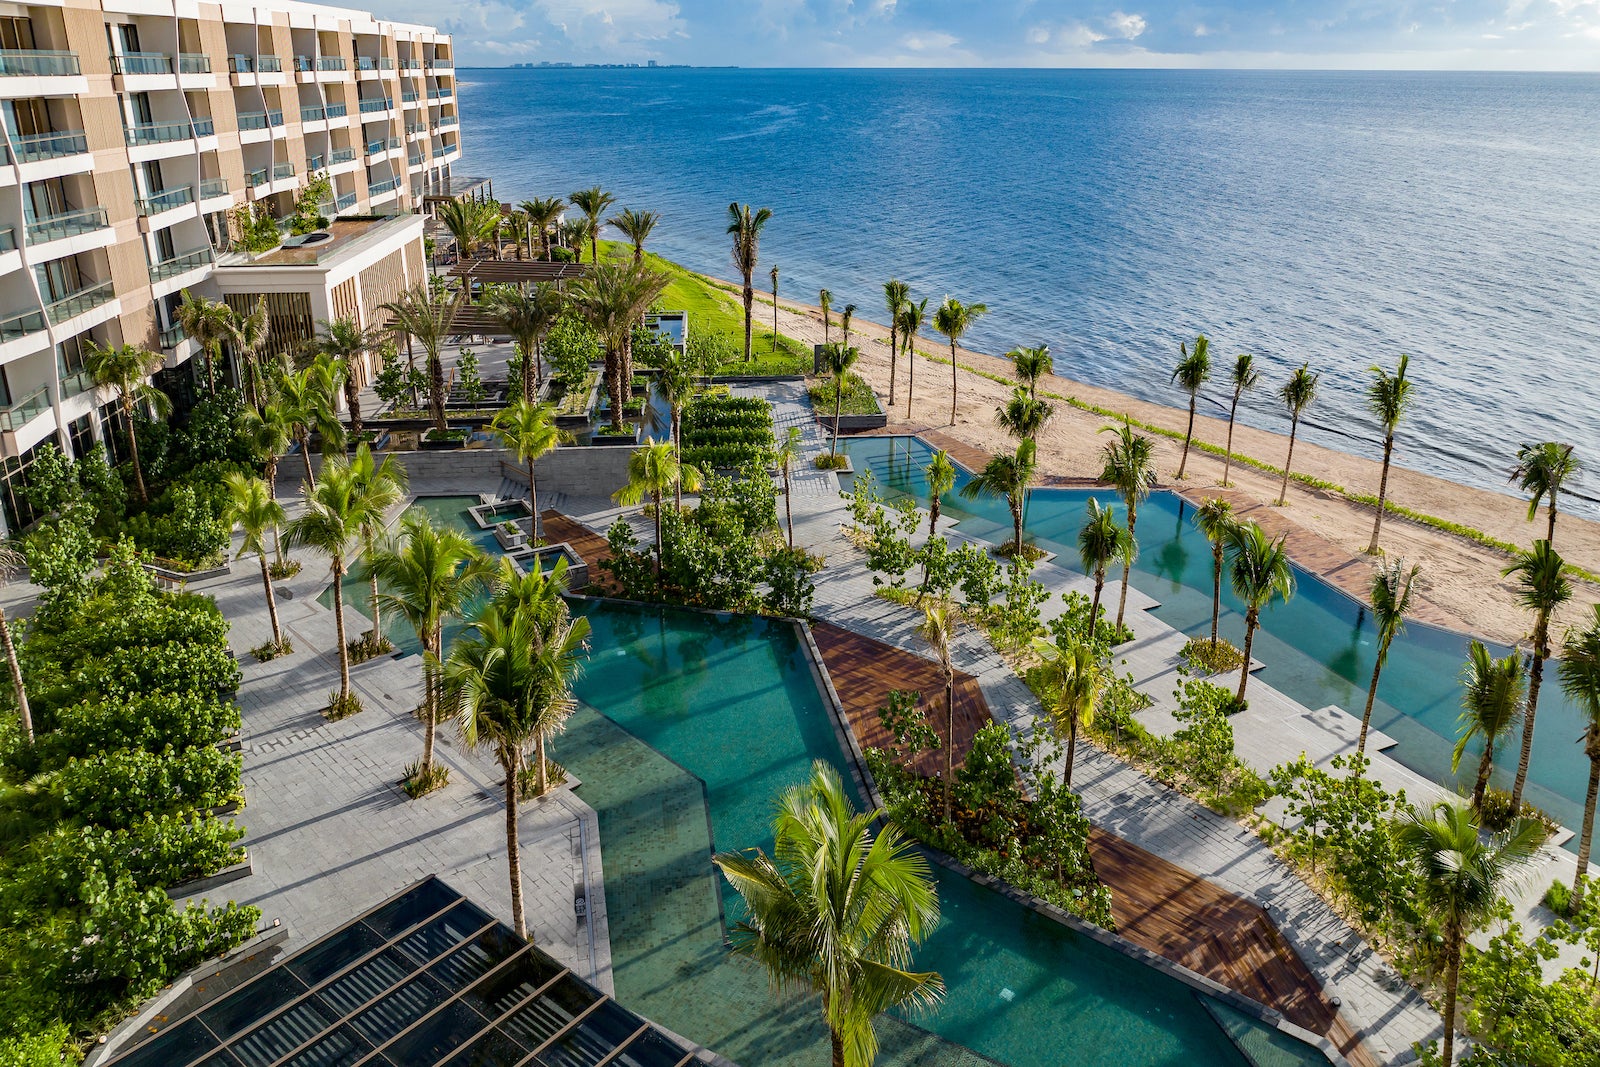 Waldorf Astoria just opened a shiny new resort in Cancun - The Points Guy